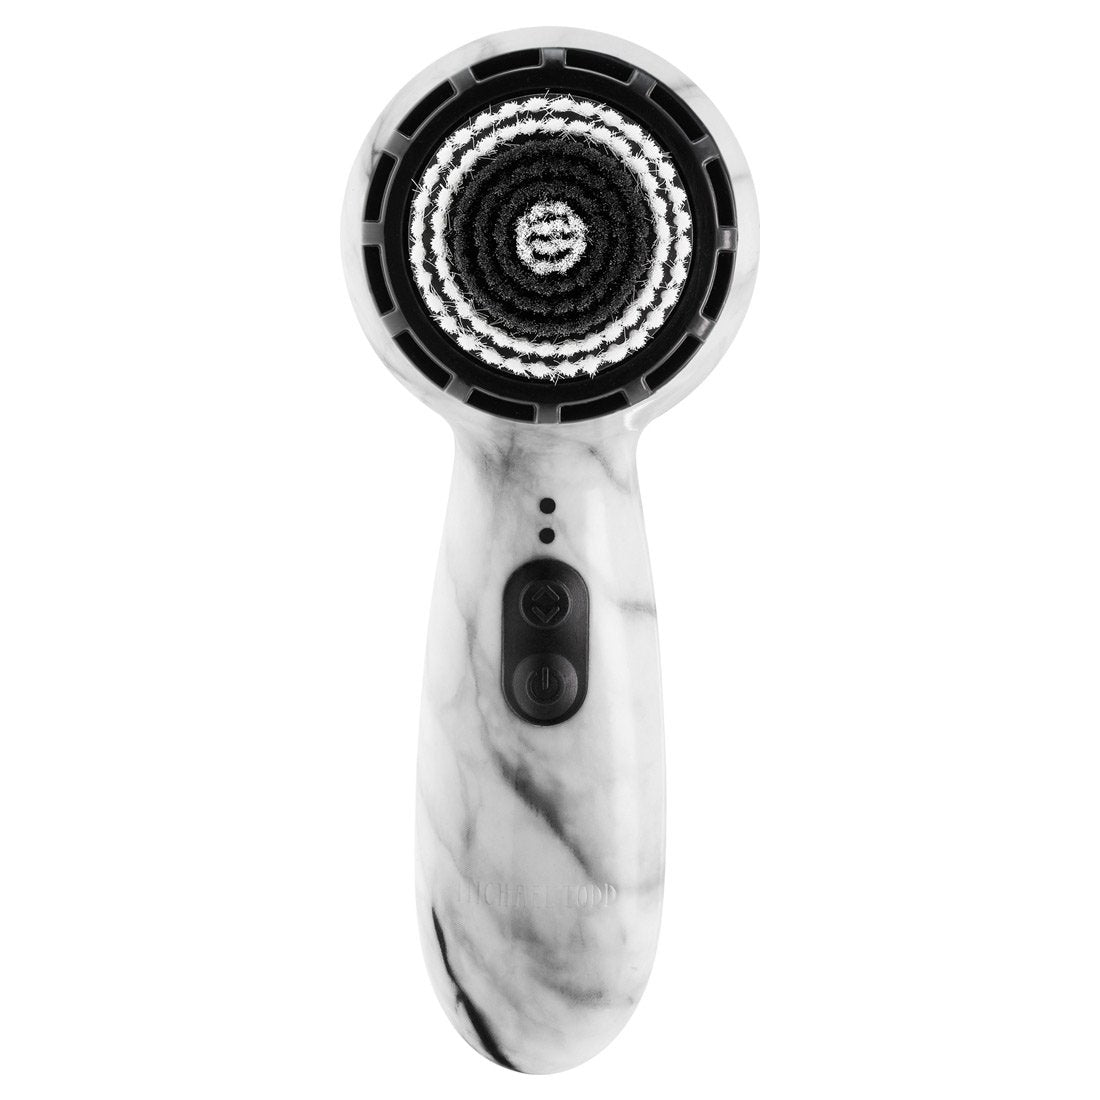 White Marble Soniclear Petite for men facial cleansing brush